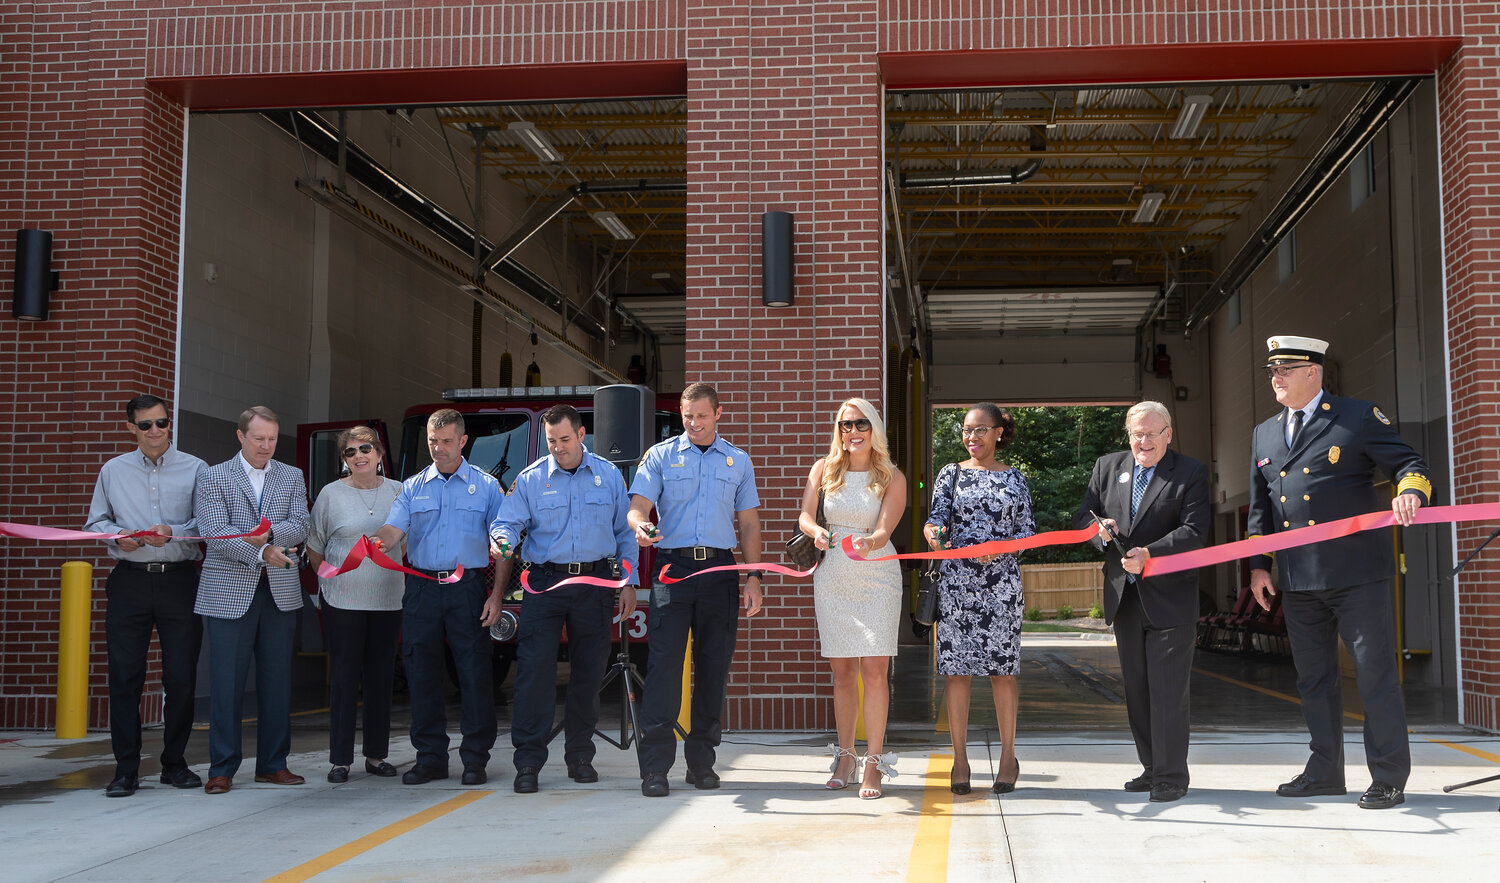 City officials cut the ribbon on Fire Station No. 13 during a Tuesday morning ceremony.